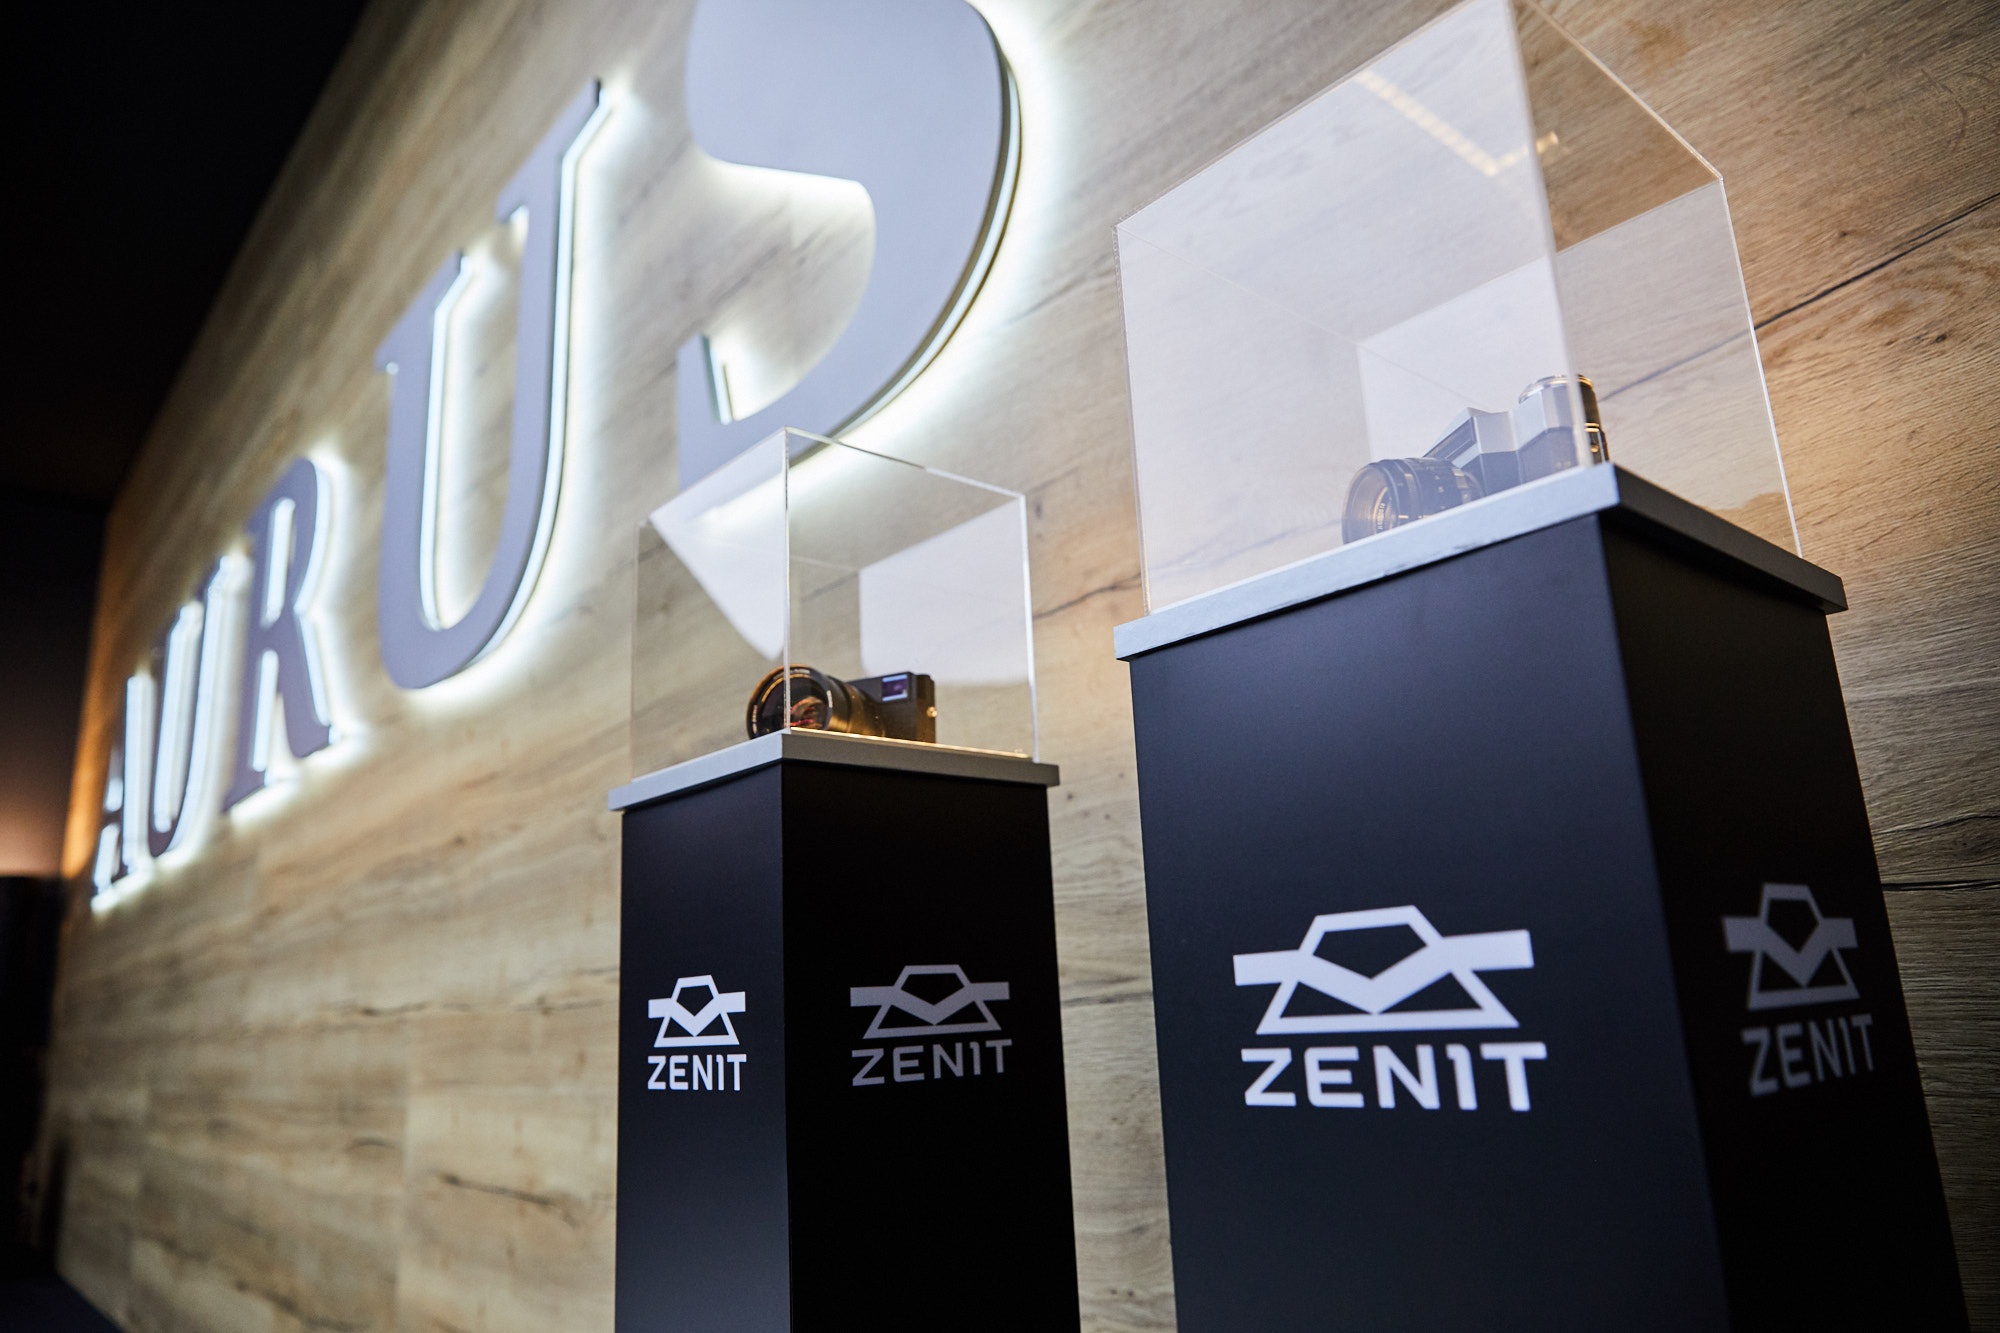 A New Camera Zenit M was Introduced at the Geneva International Motorshow